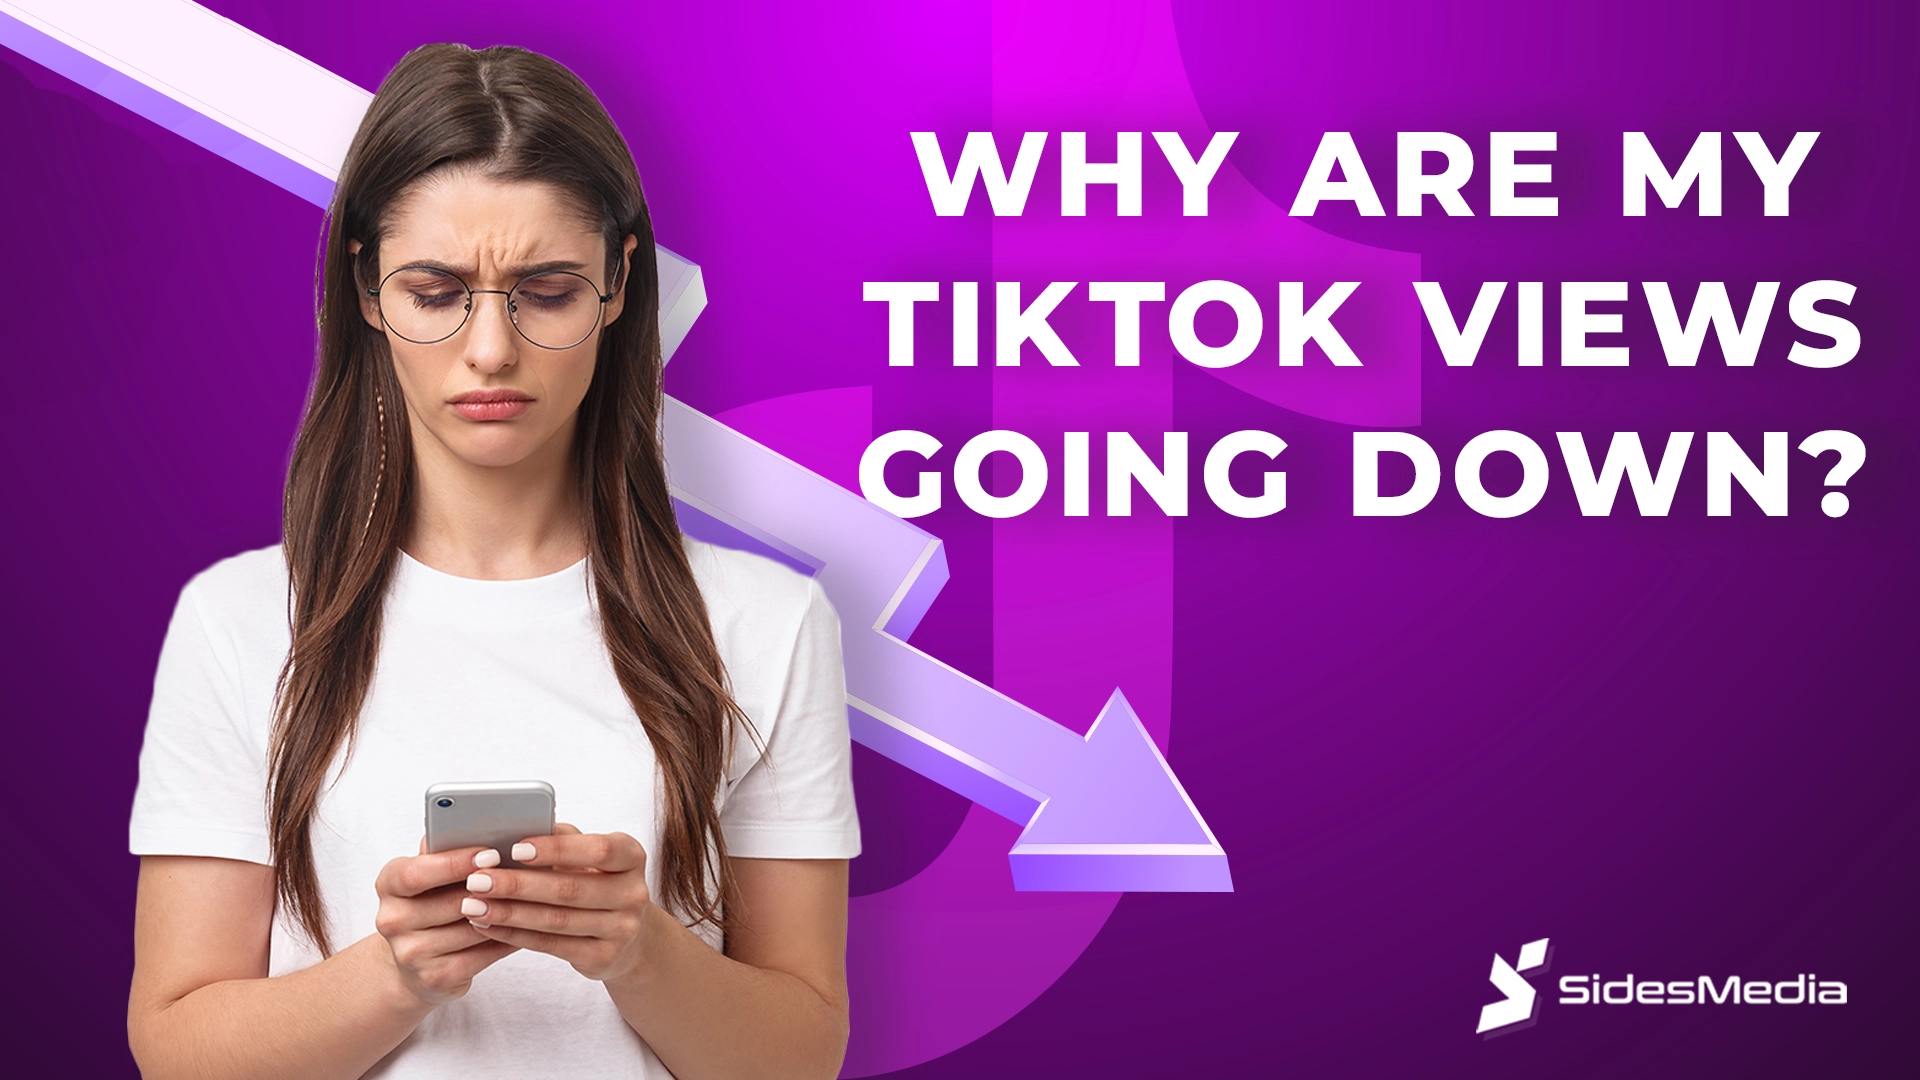 12 Solutions to Why Are My TikTok Views Going Down